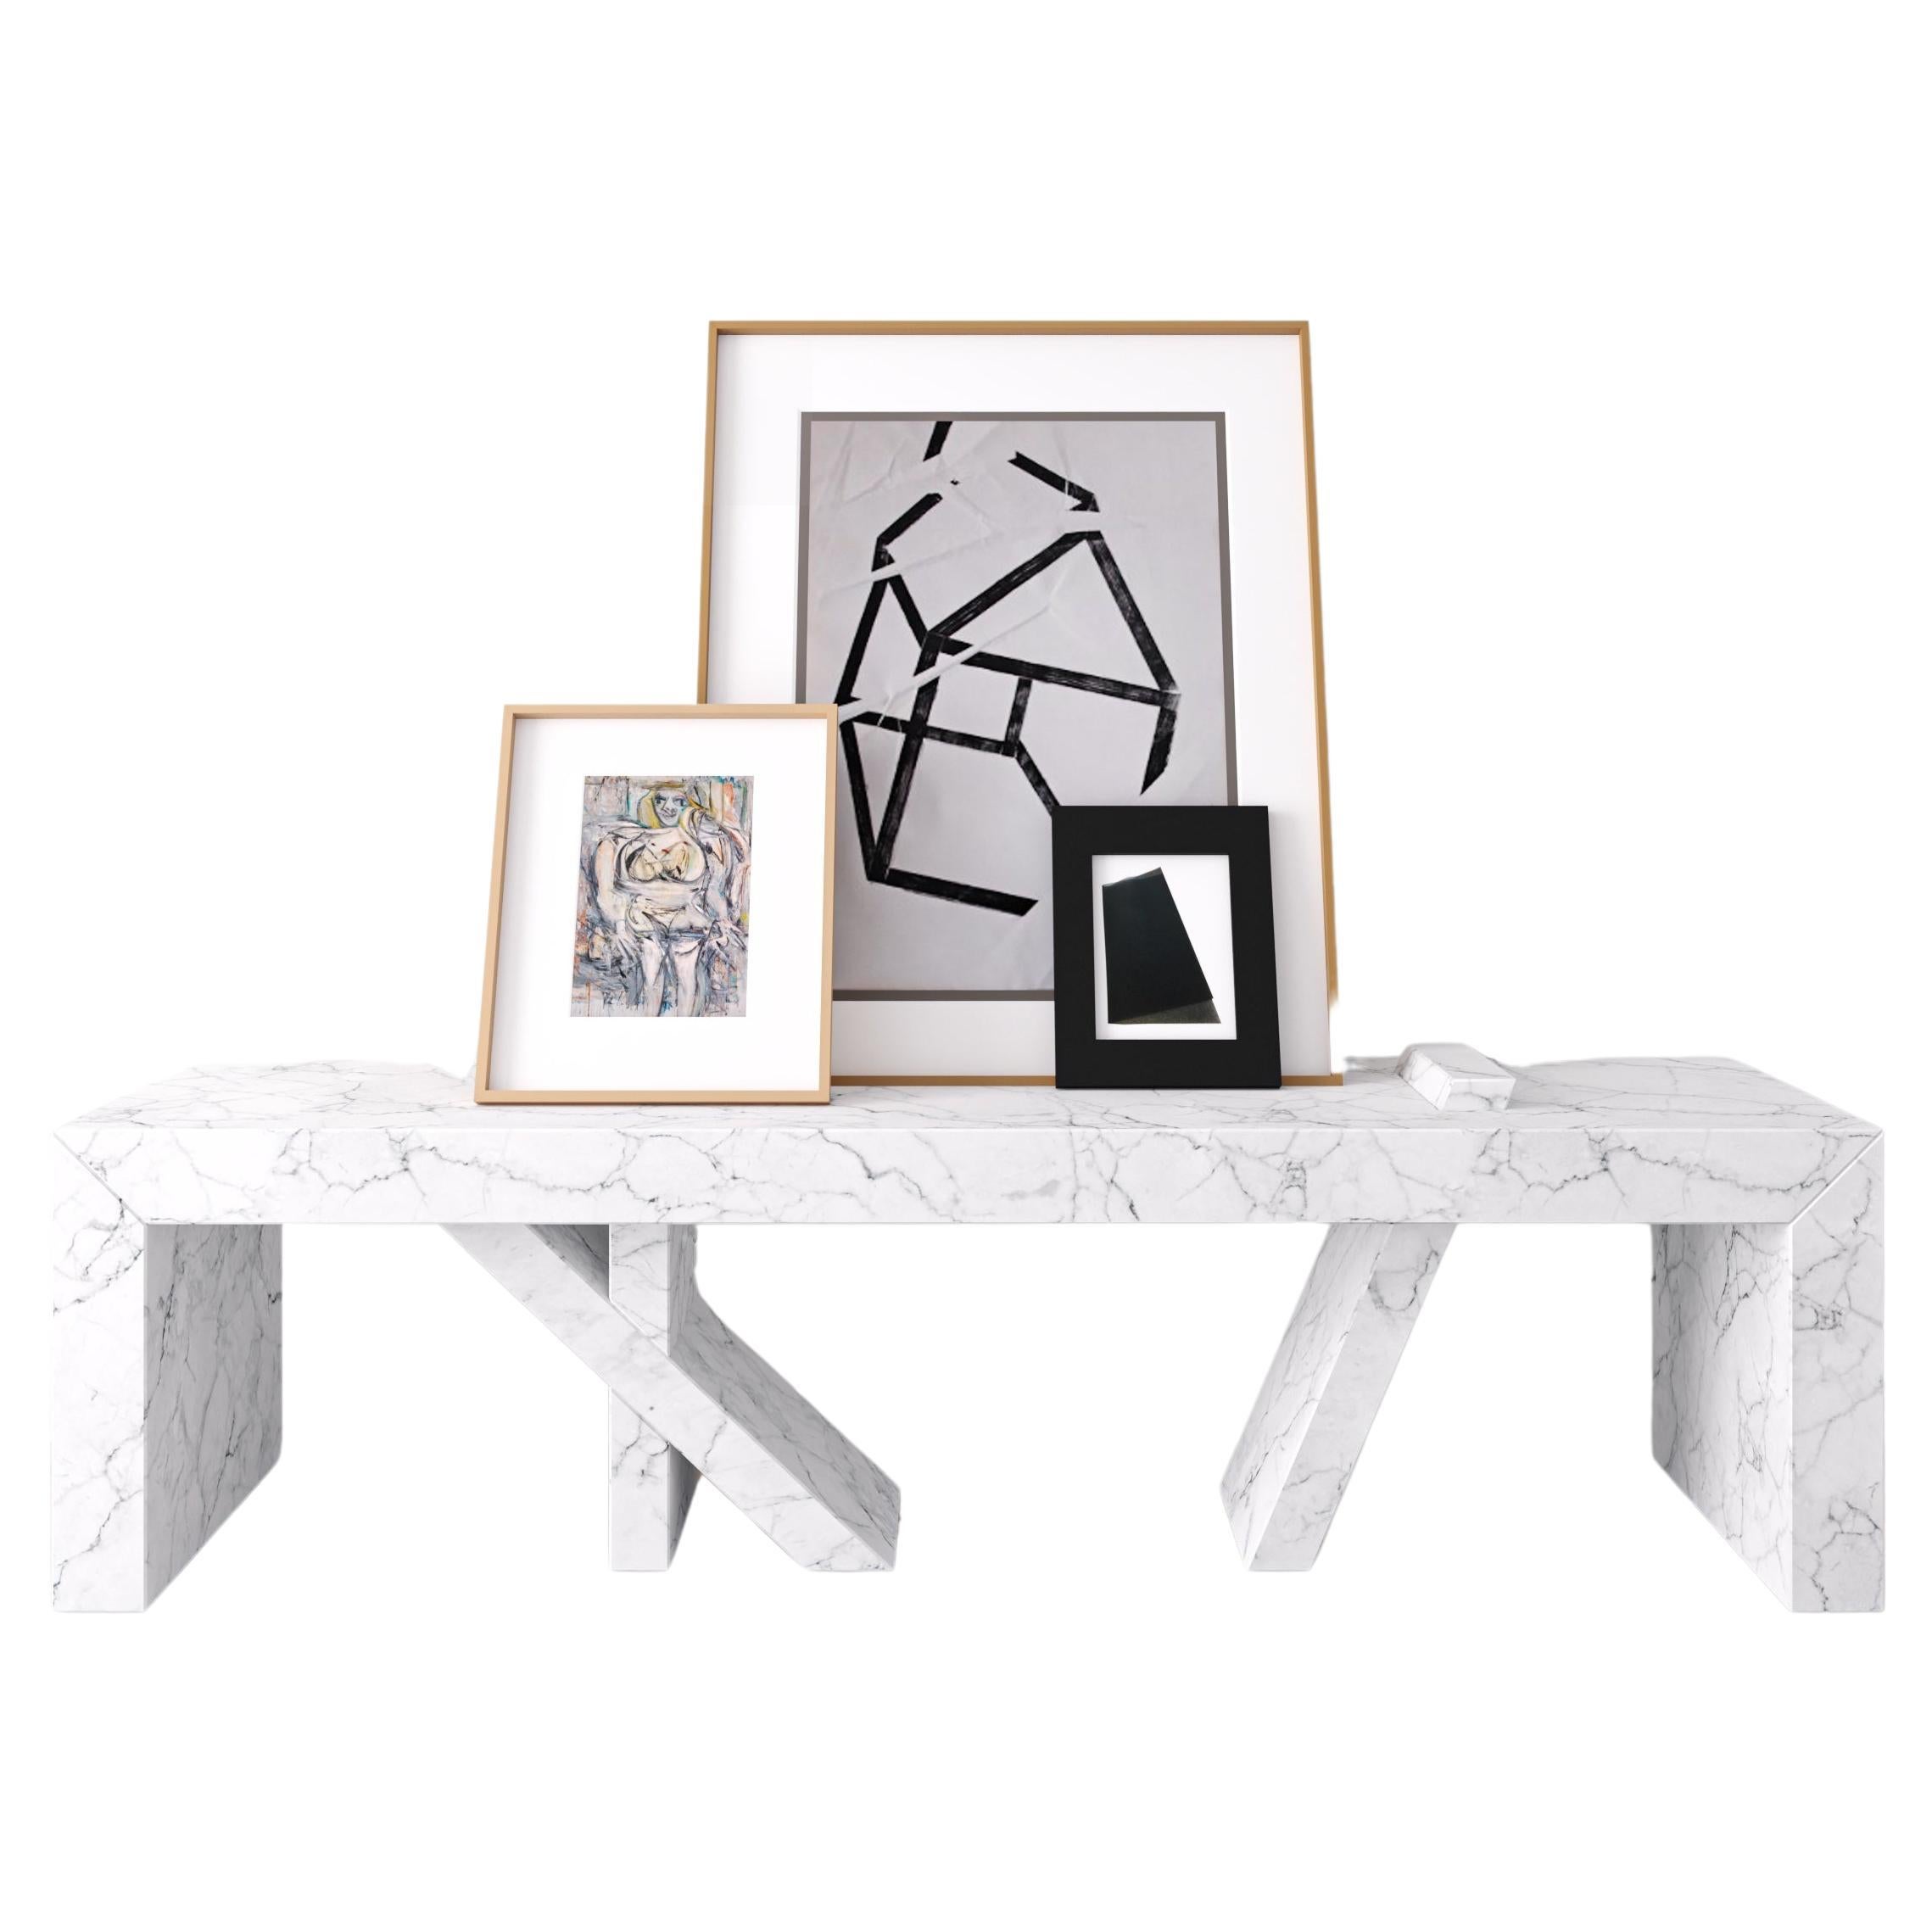 Walking Bench 6ft, solid white marble stone bench for indoor or outdoor use